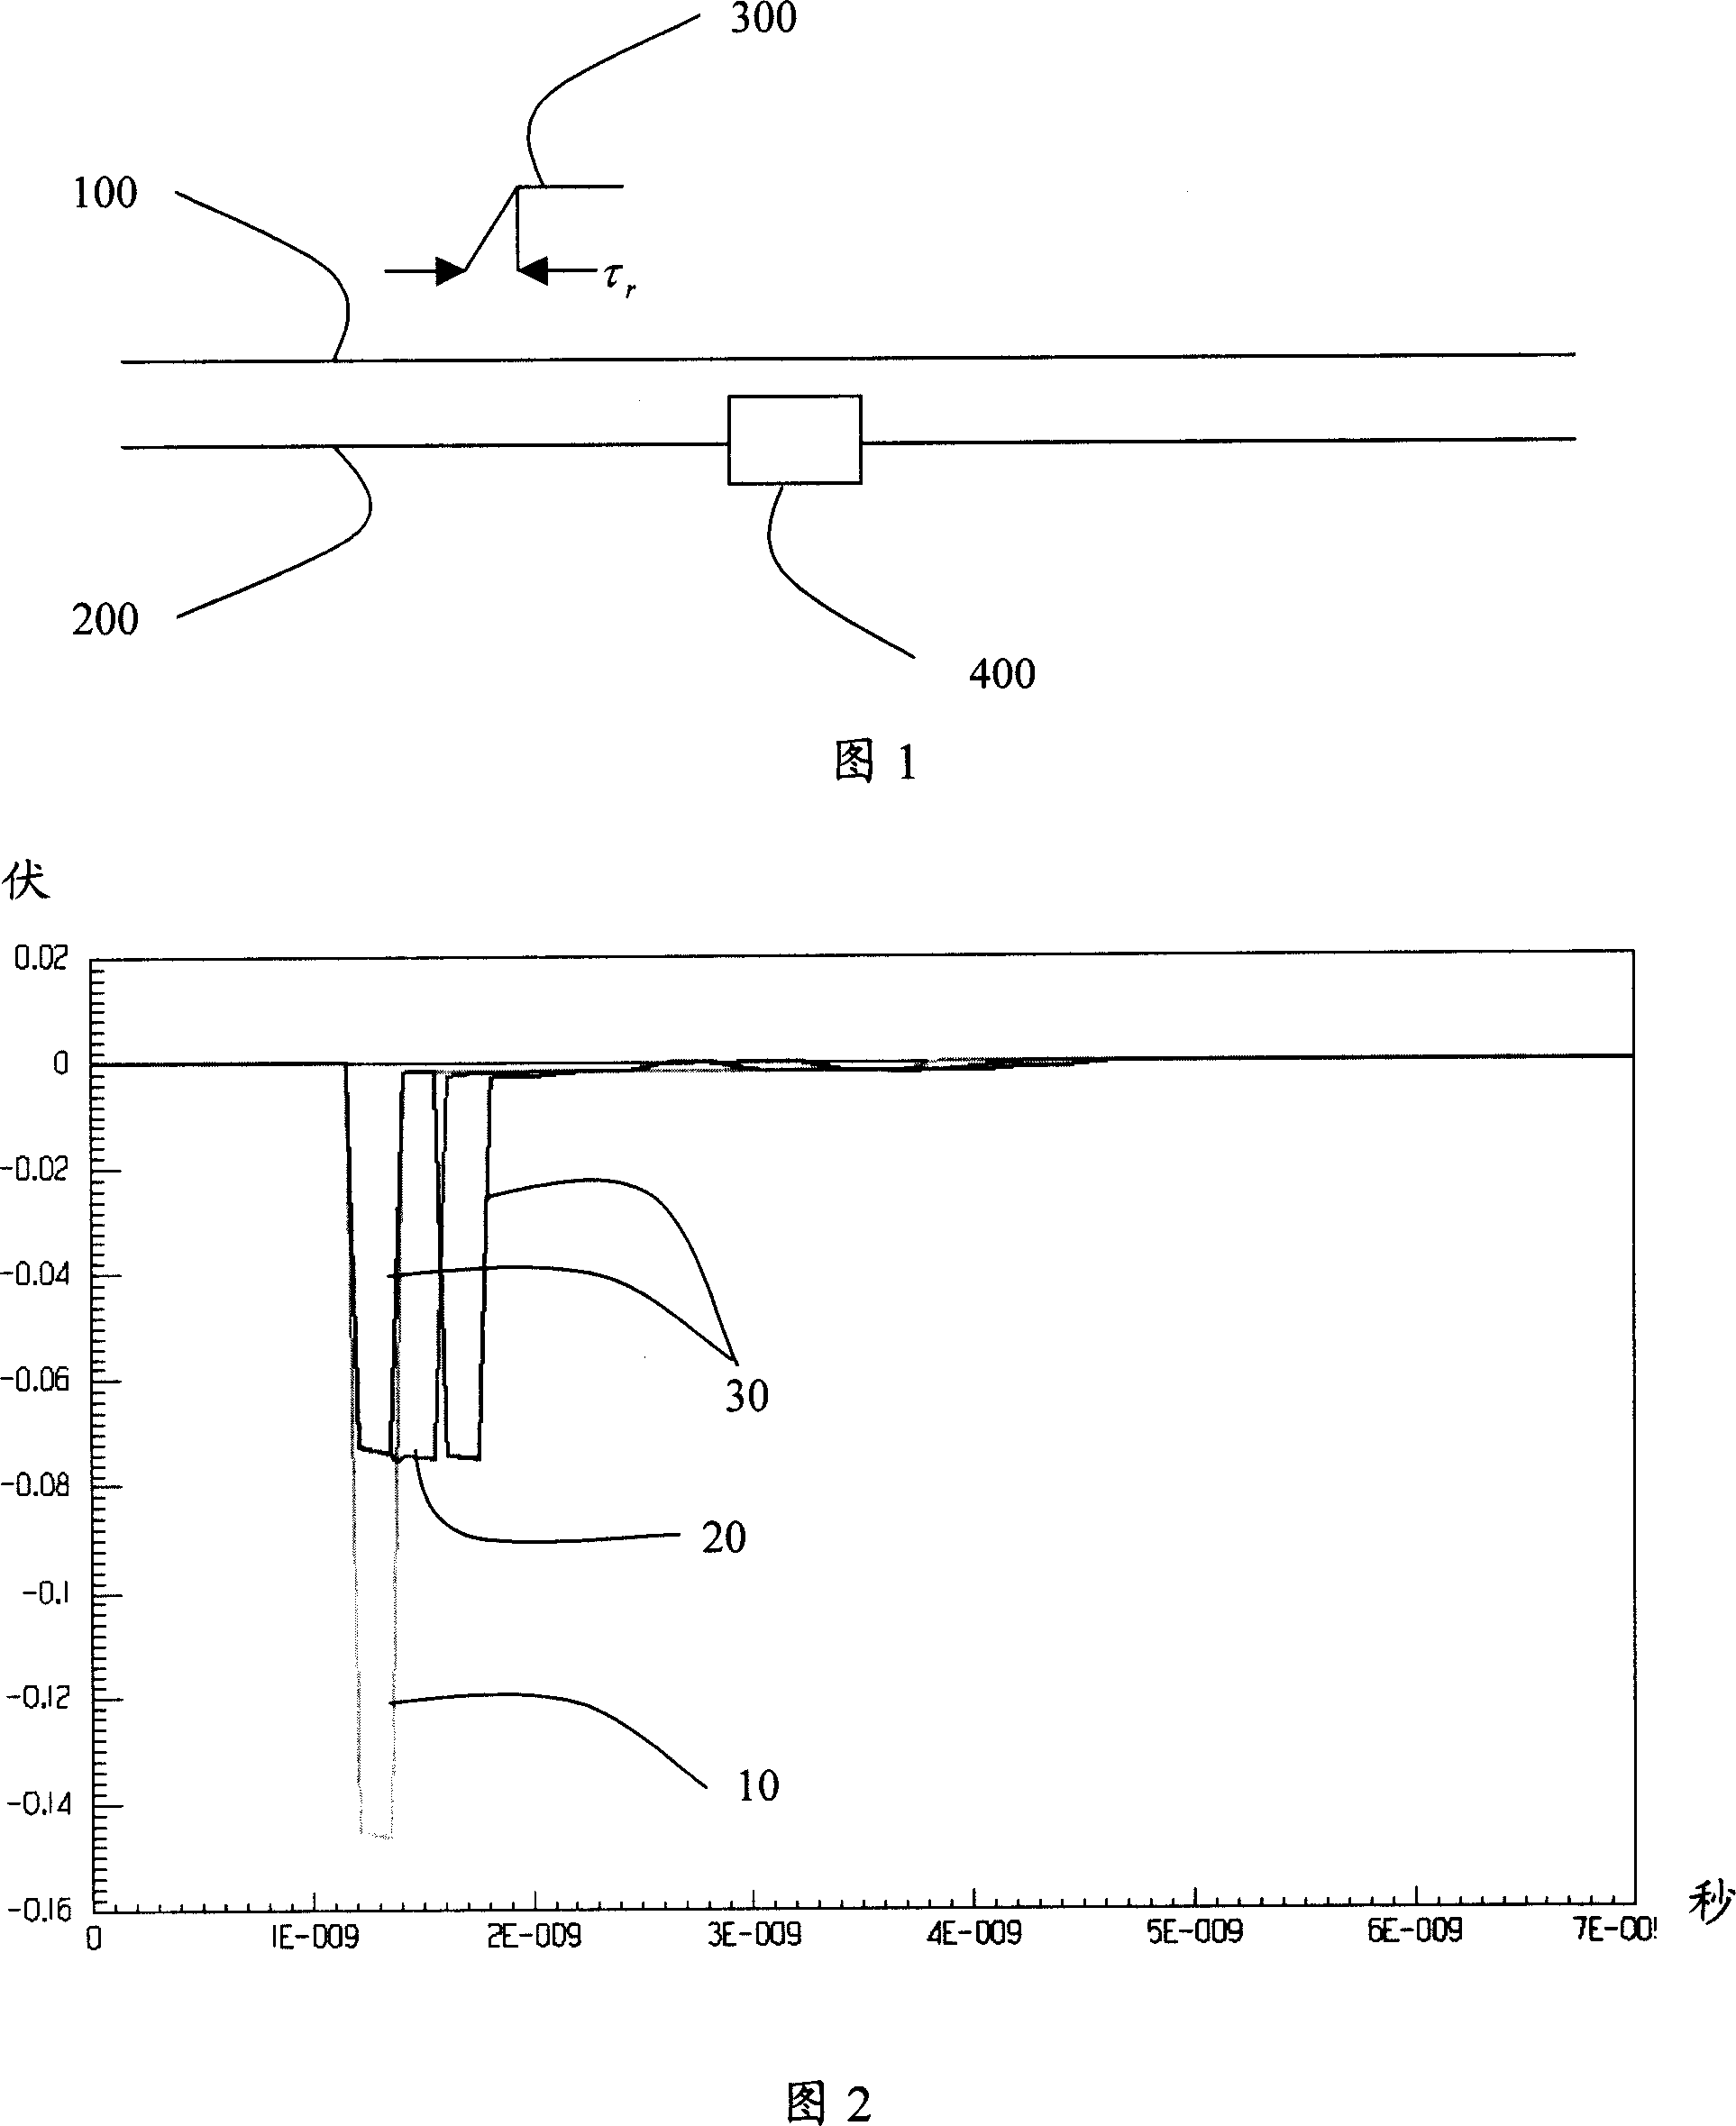 A wiring structure and method to reduce the far-end cross talk between parallel signal circuits